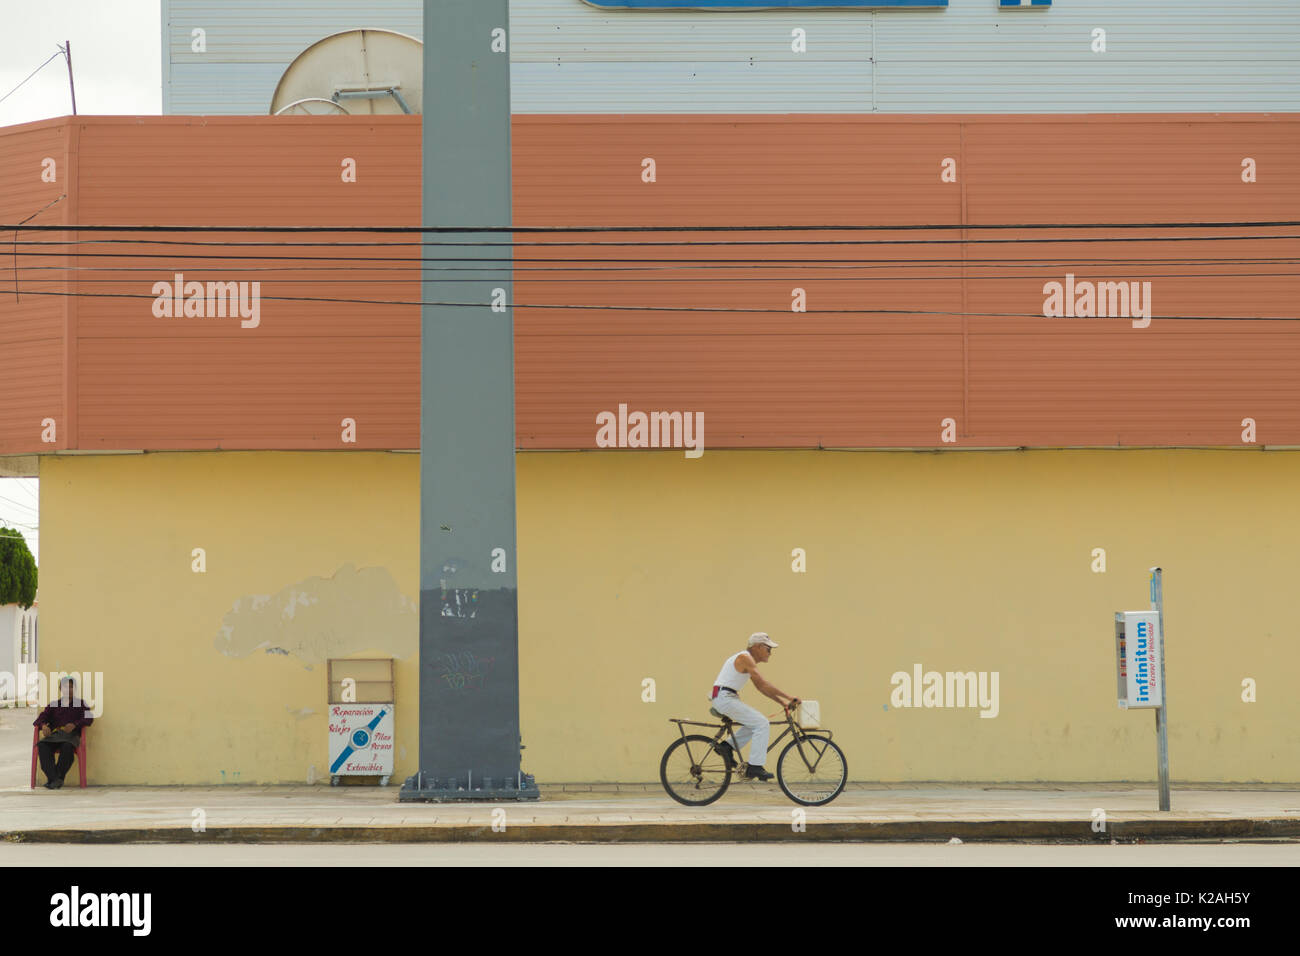 A street view of a bicycling man and another man sitting in the street corner in Cancun, Mexico. Stock Photo